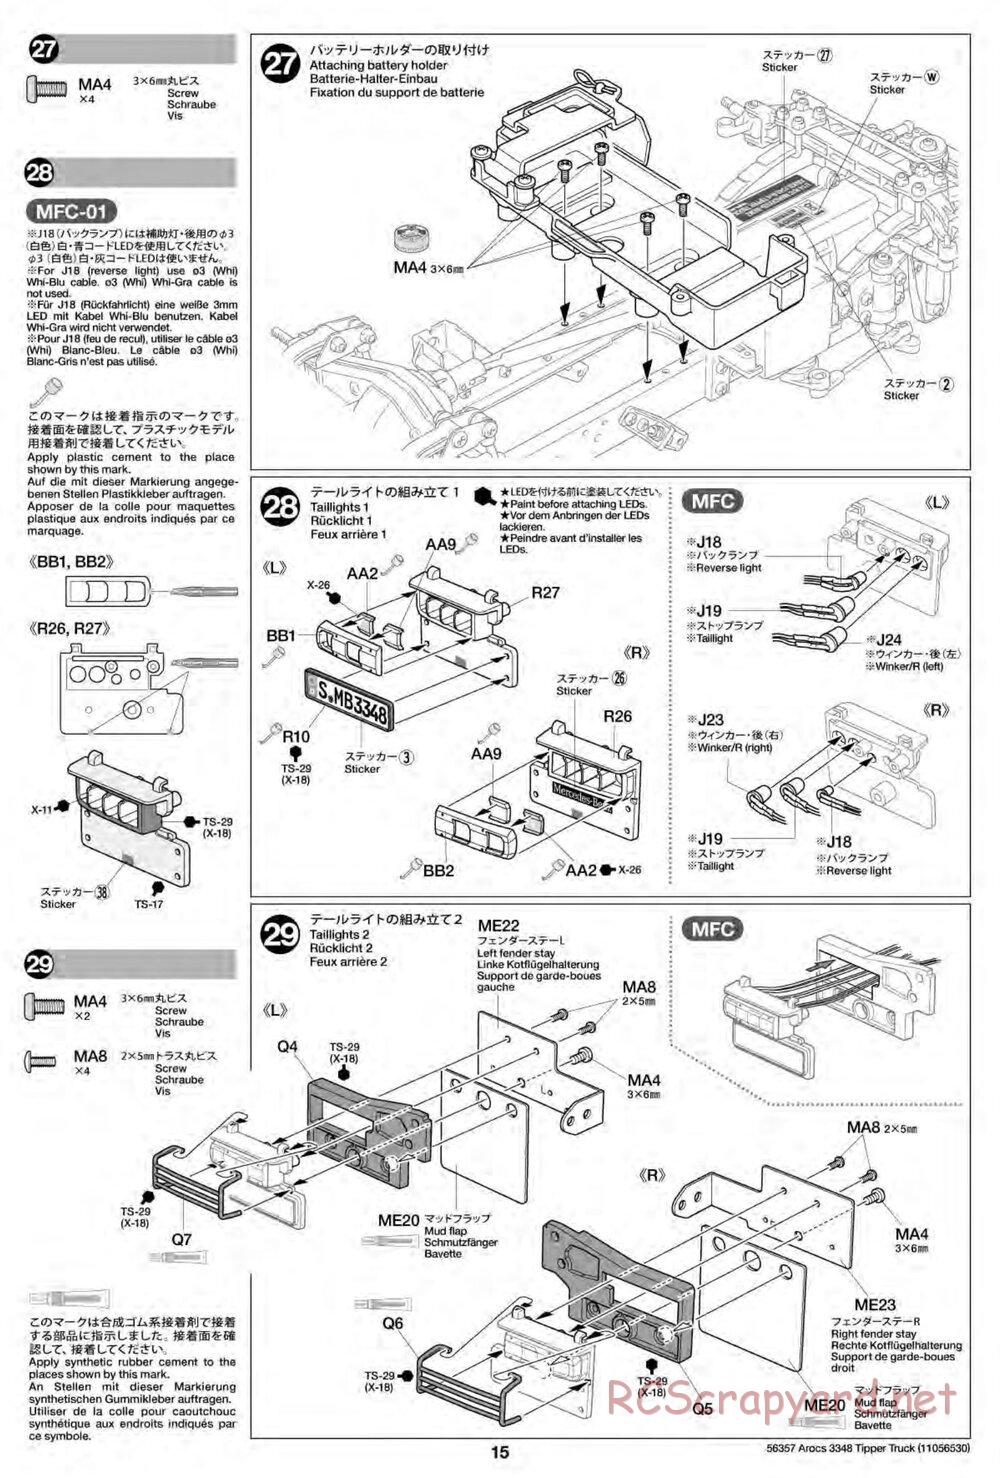 Tamiya - Mercedes-Benz Arocs 3348 6x4 Tipper Truck Chassis - Manual - Page 15